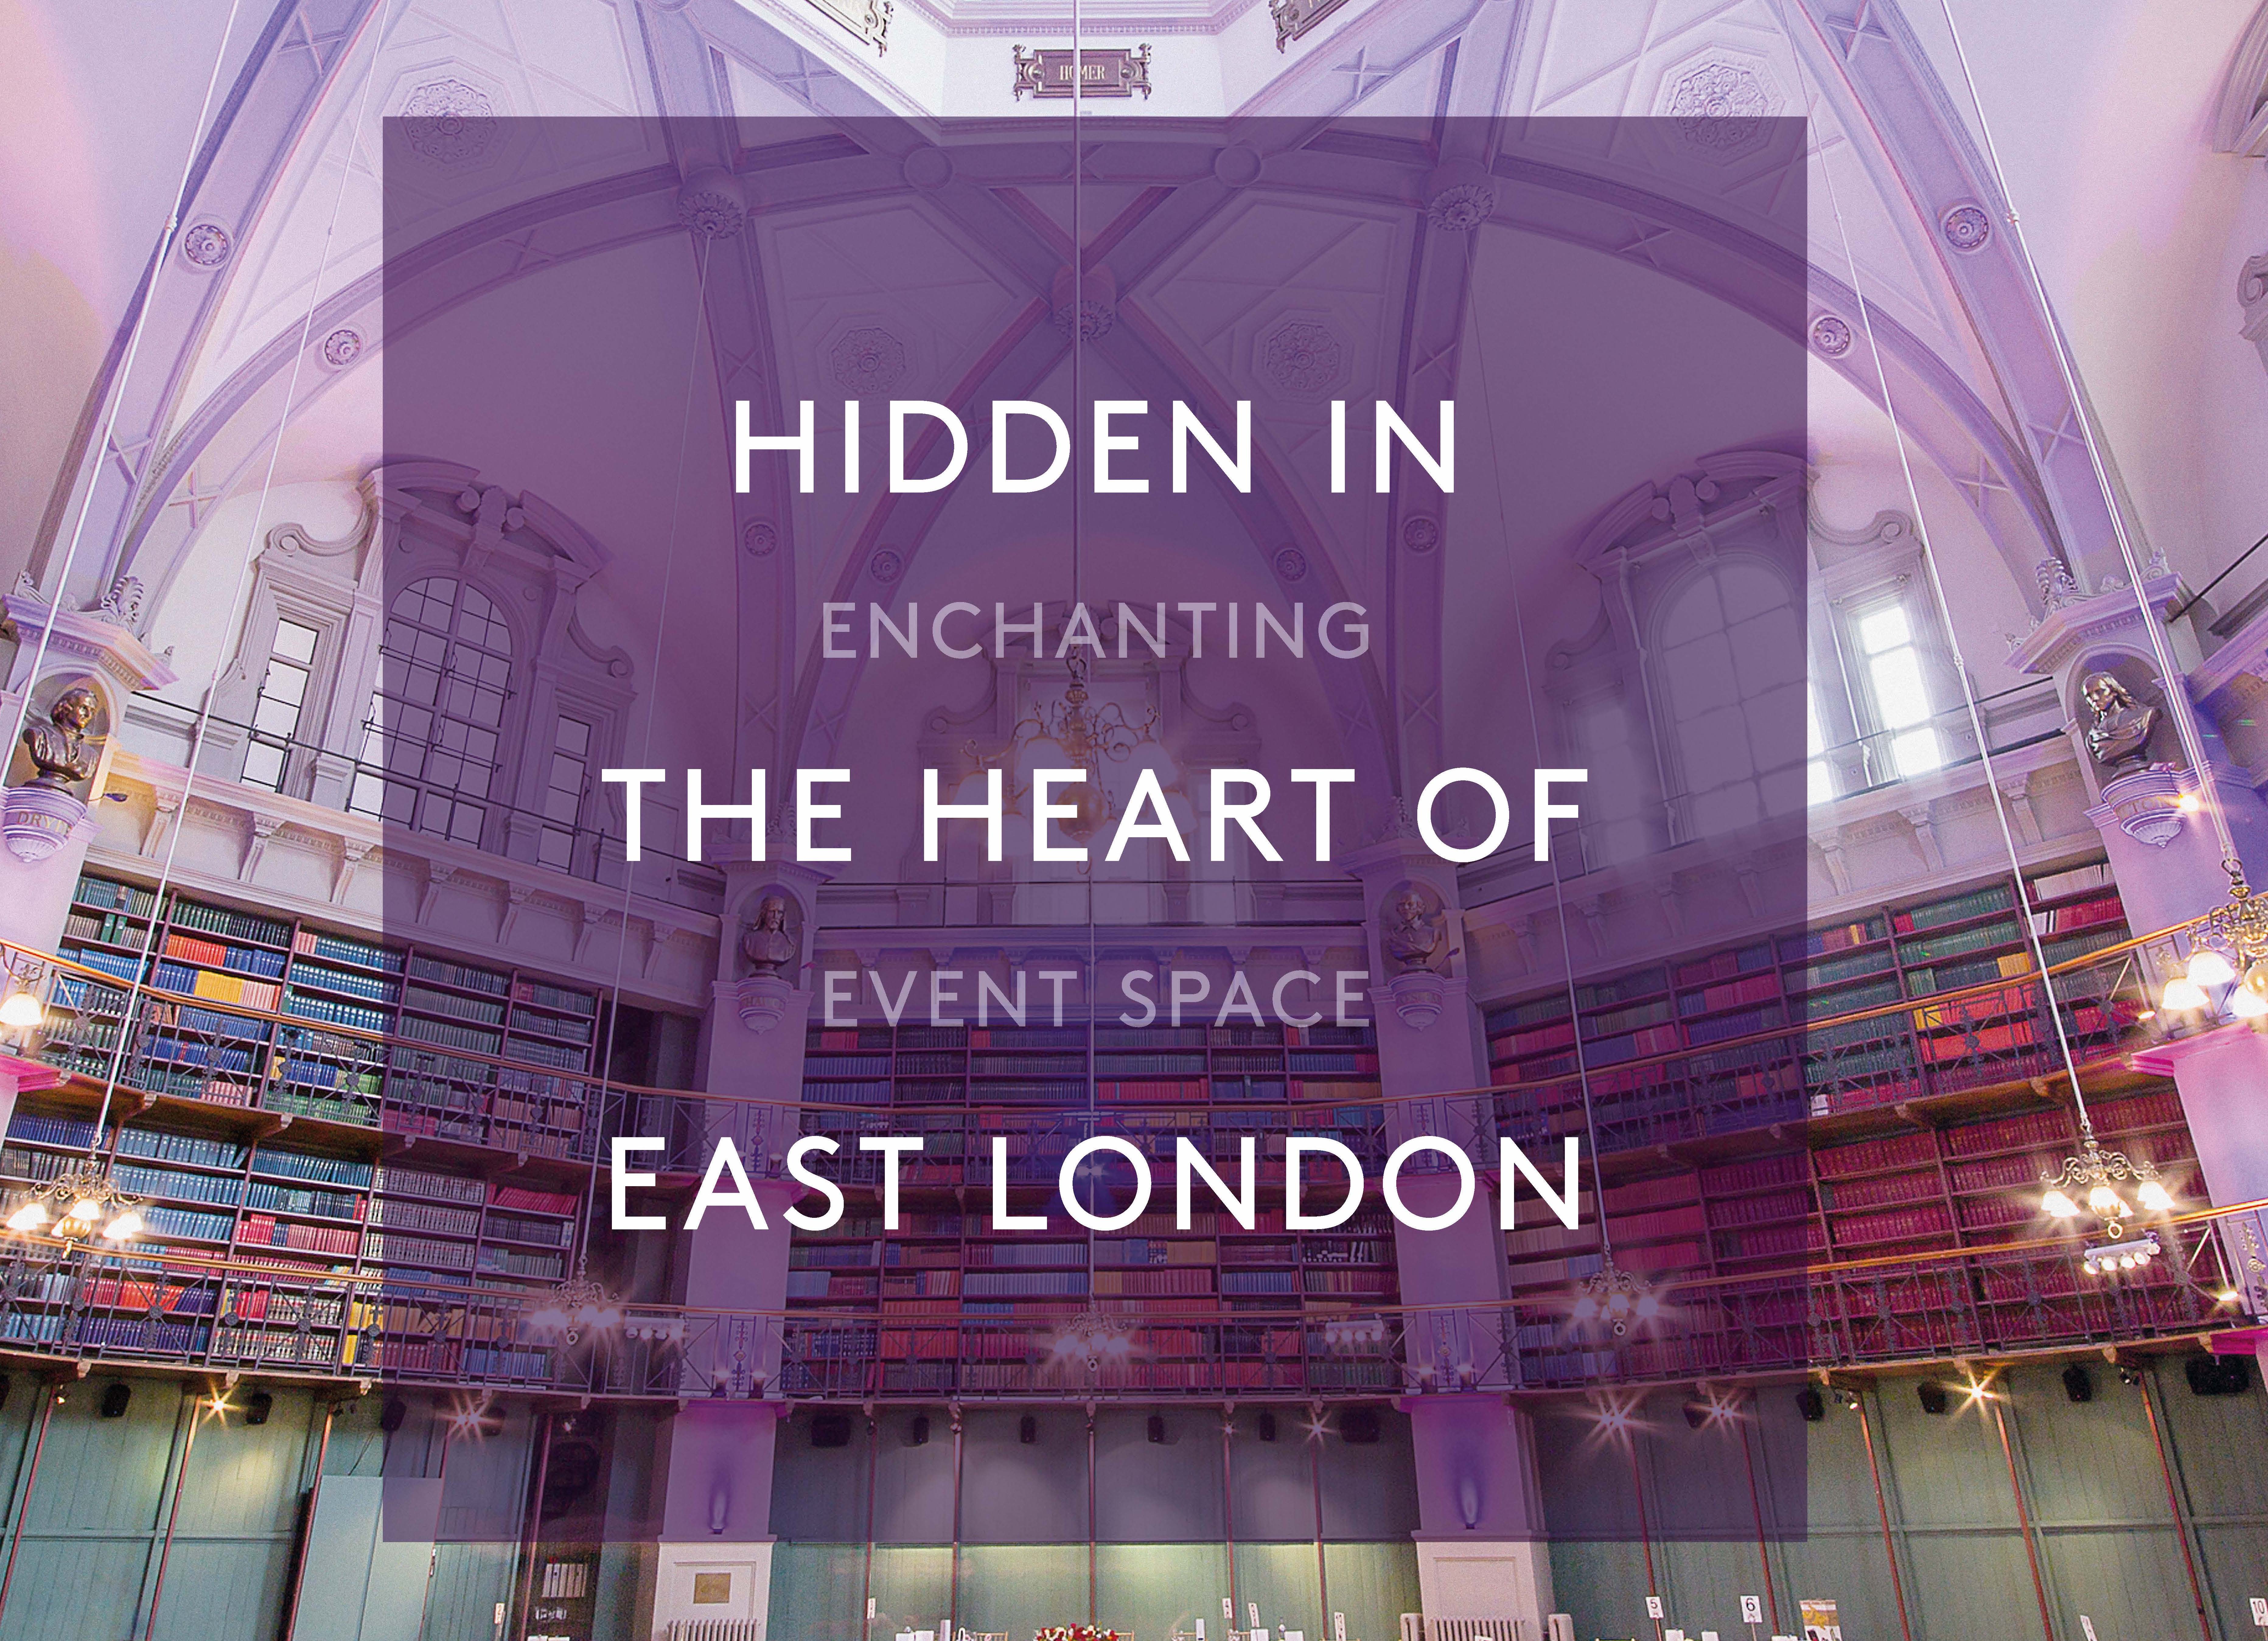 Hidden and enchanting event space